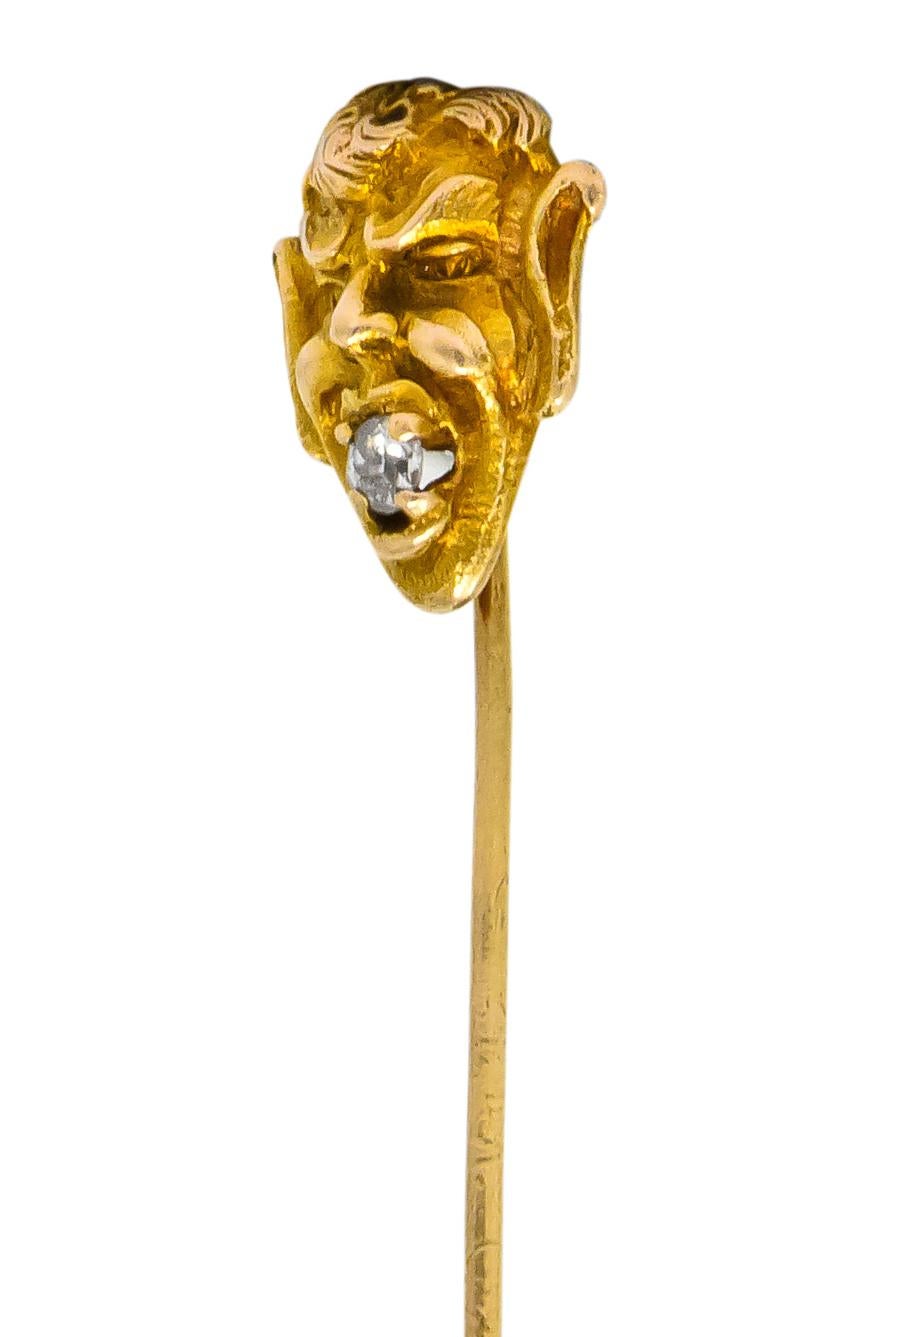 Depicting the elvish face of the Greek god Pan holding a diamond in his mouth 

Old European cut diamond weighing approximately 0.10 carat, eye-clean and white

Detailed gold with curled hair and over-sized ears

Tested as 10 karat gold

Man